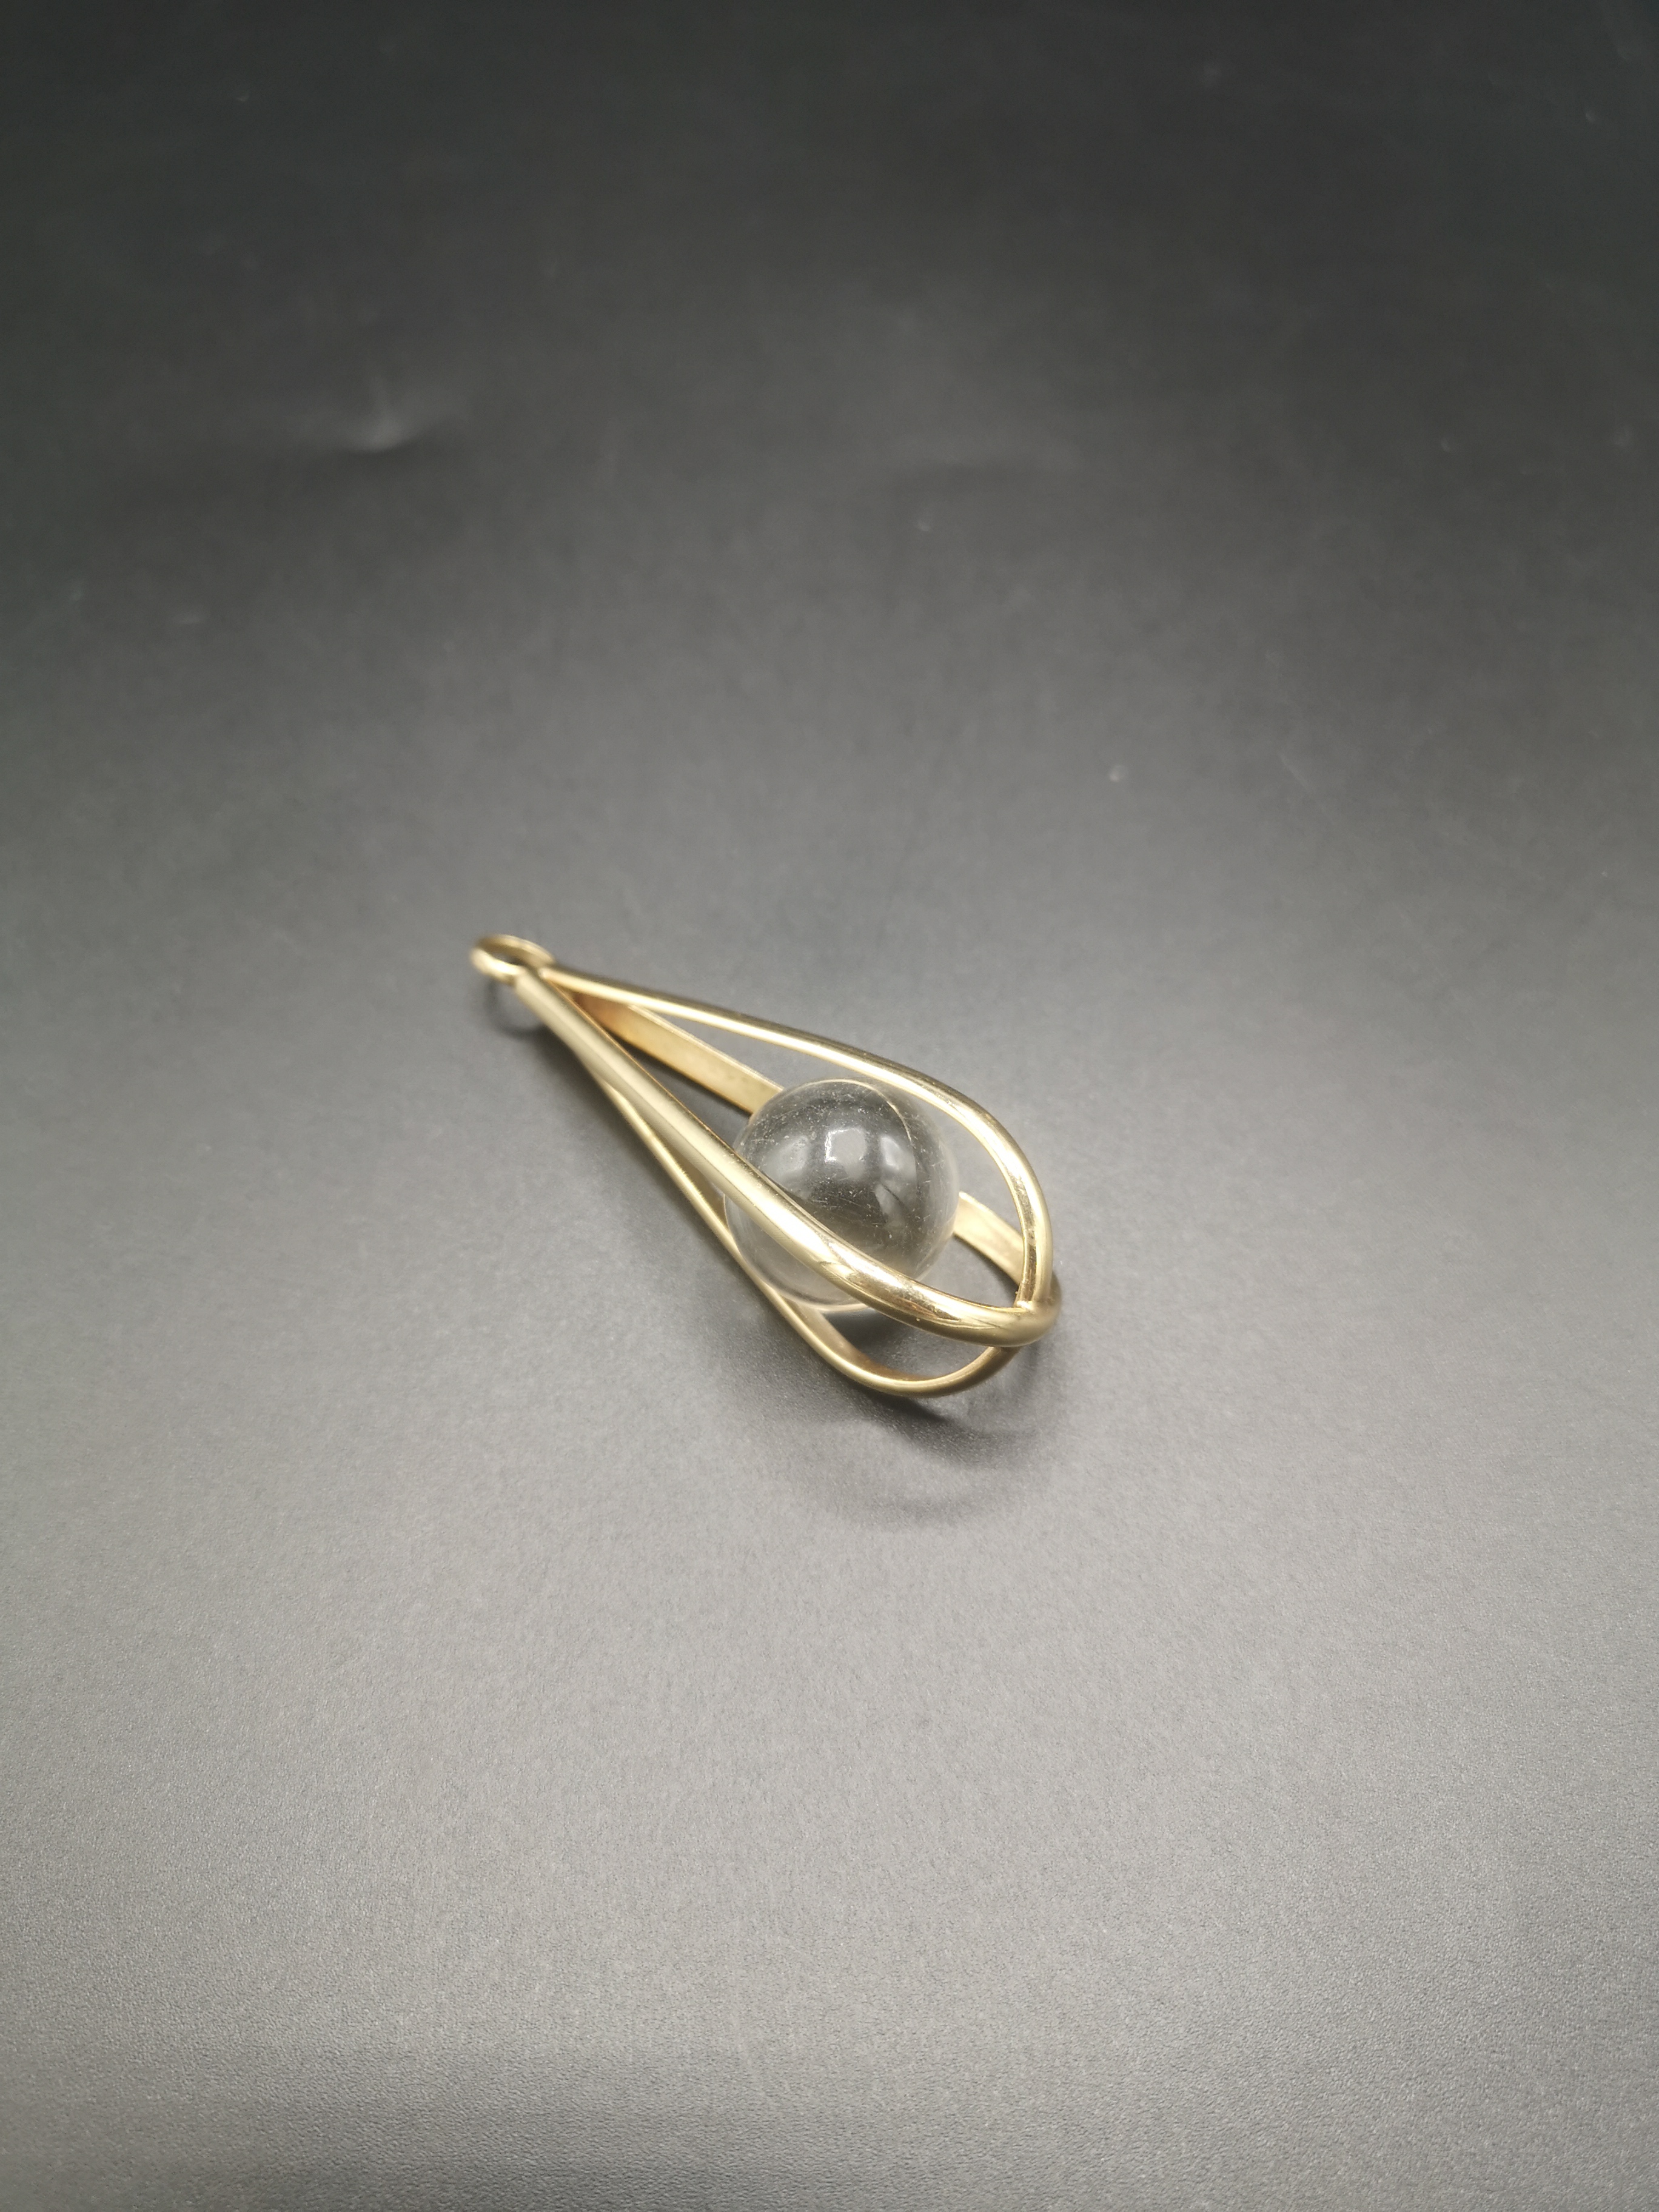 9ct gold pendant together with a 9ct gold ring - Image 5 of 8